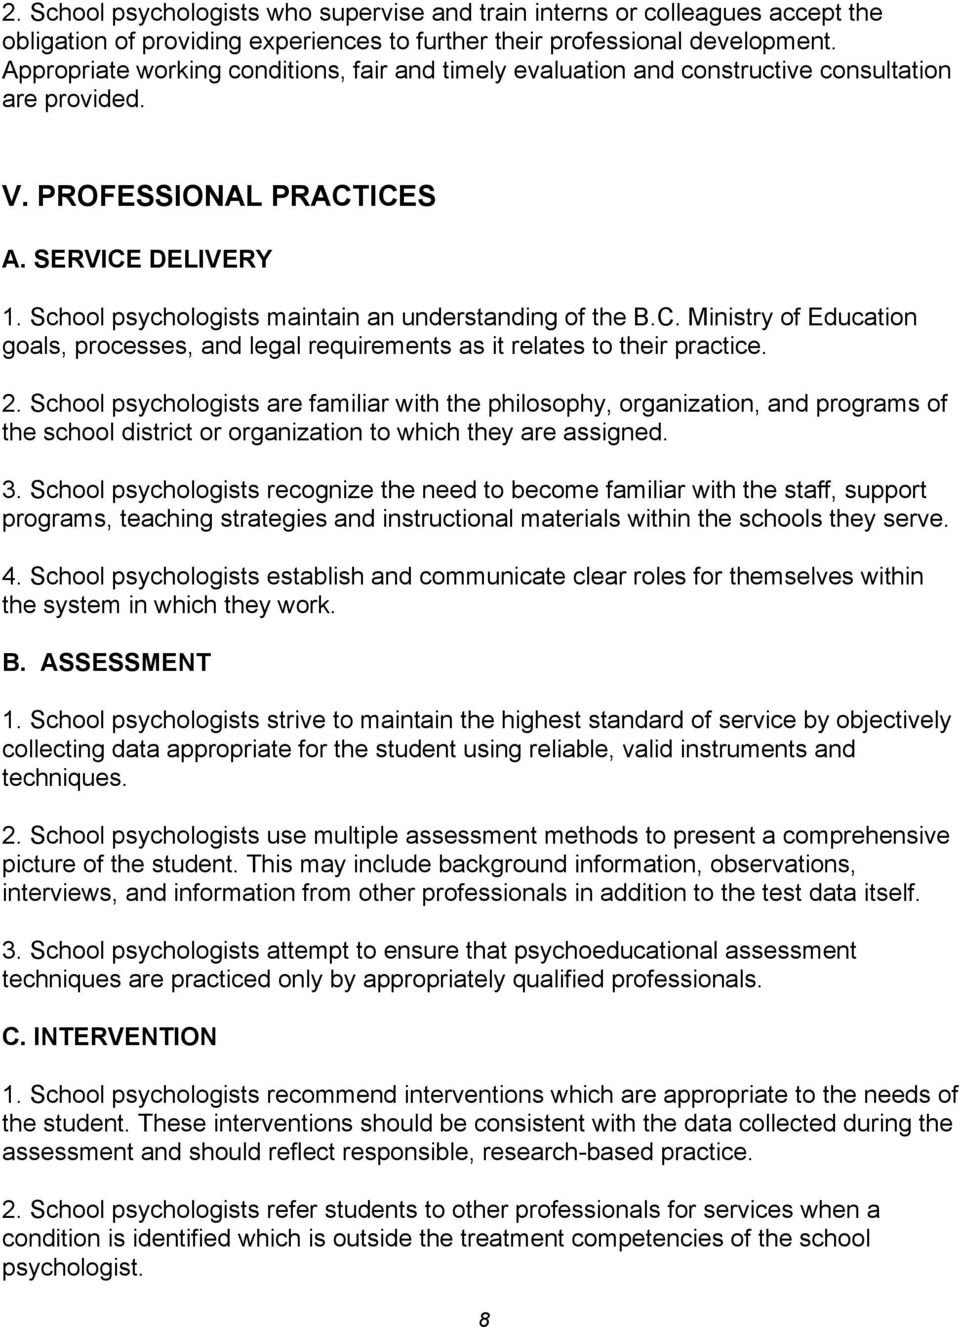 School psychologists maintain an understanding of the B.C. Ministry of Education goals, processes, and legal requirements as it relates to their practice. 2.